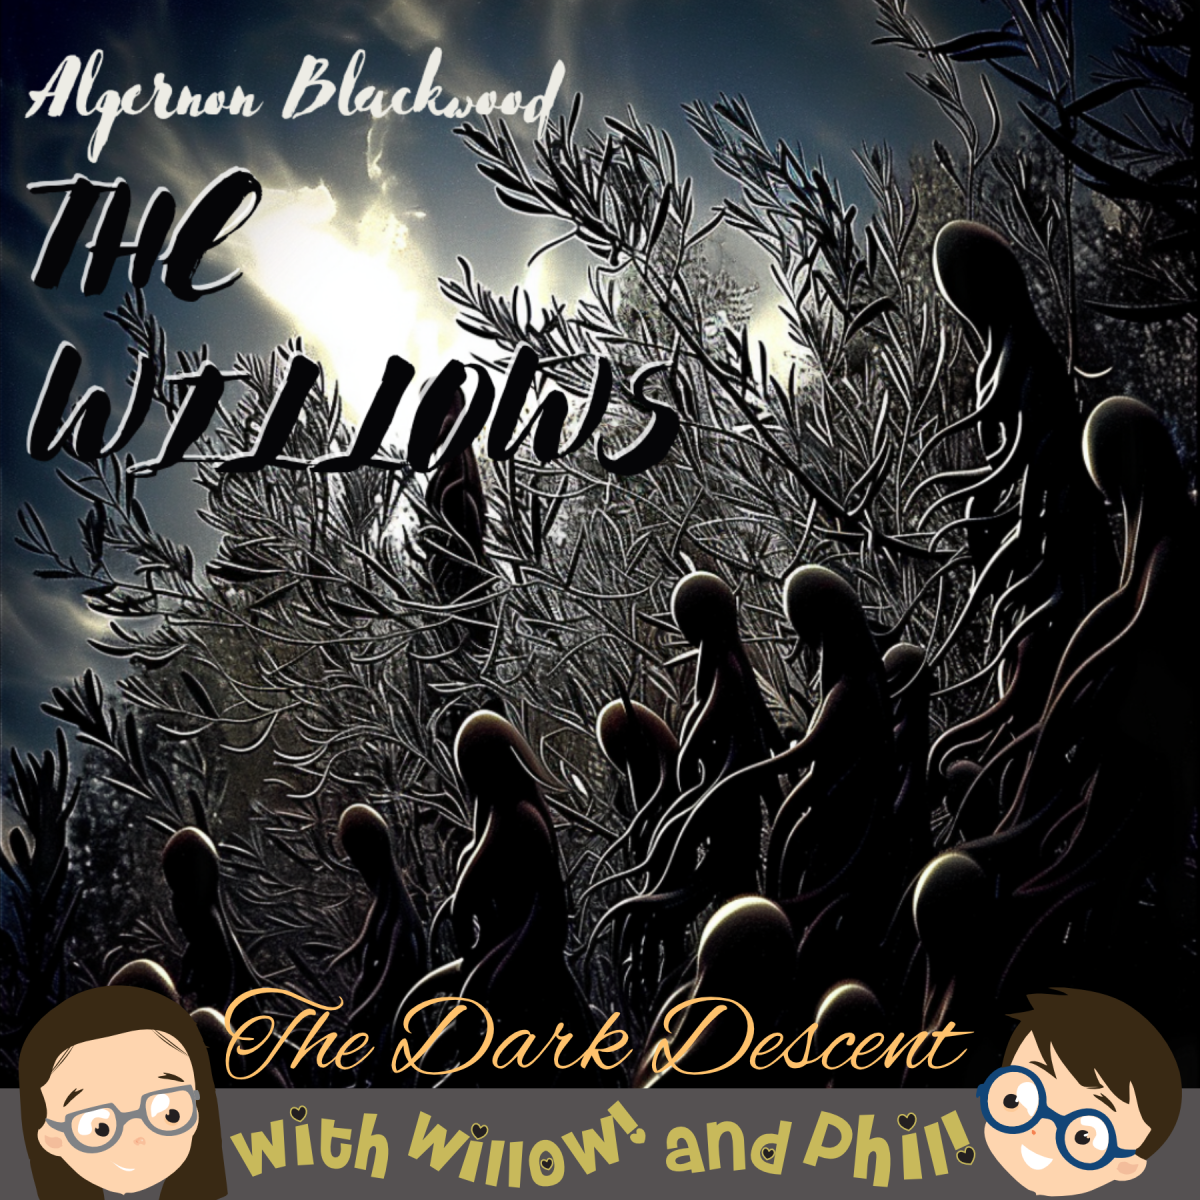 The Dark Descent – “The Willows” by Algernon Blackwood